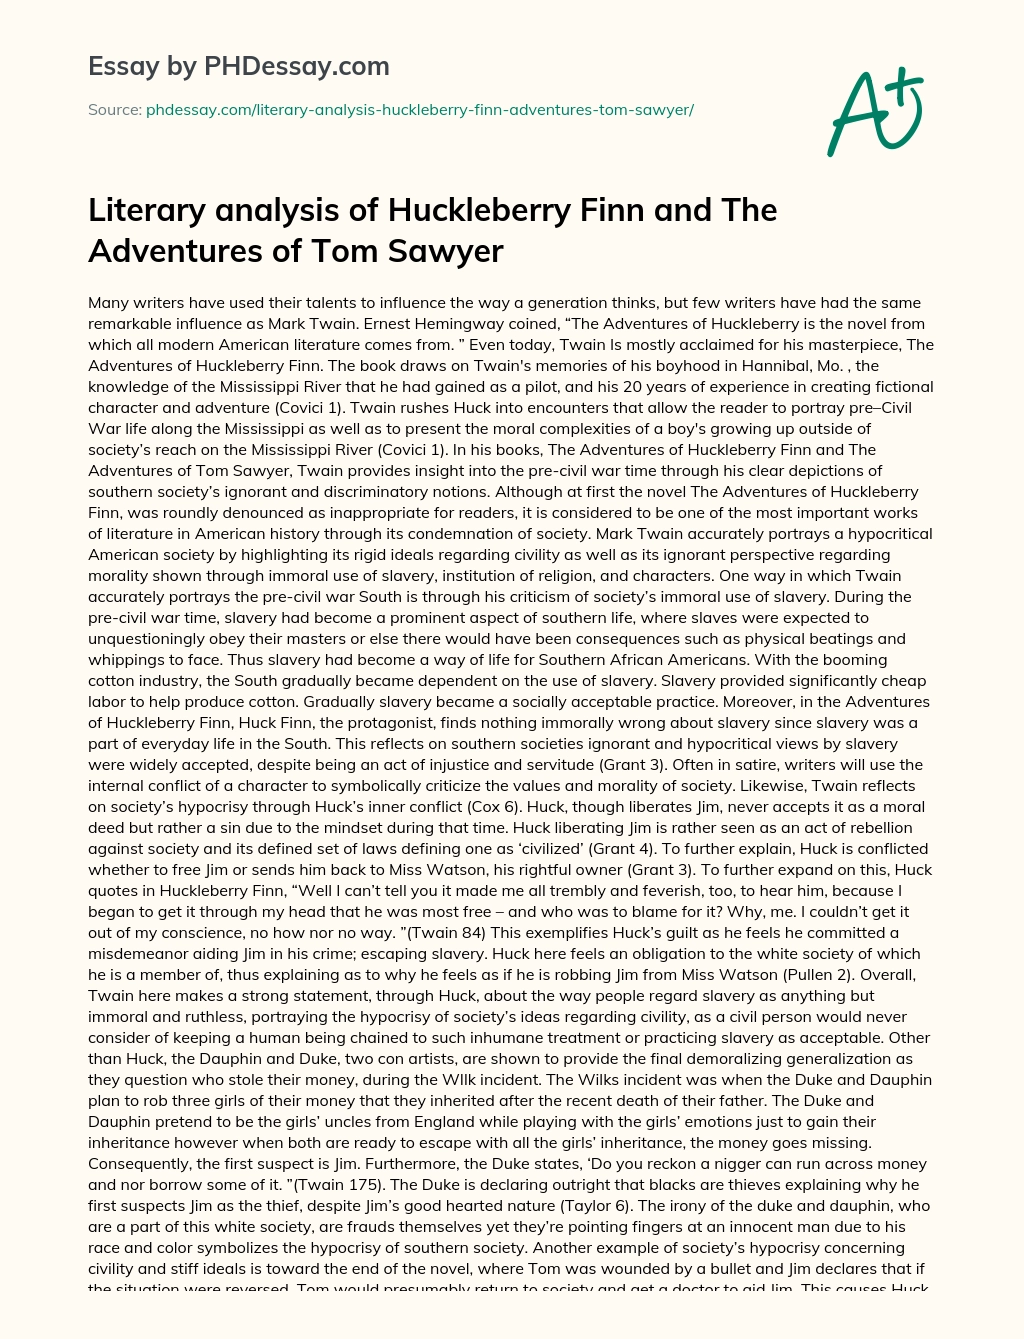 Literary analysis of Huckleberry Finn and The Adventures of Tom Sawyer essay